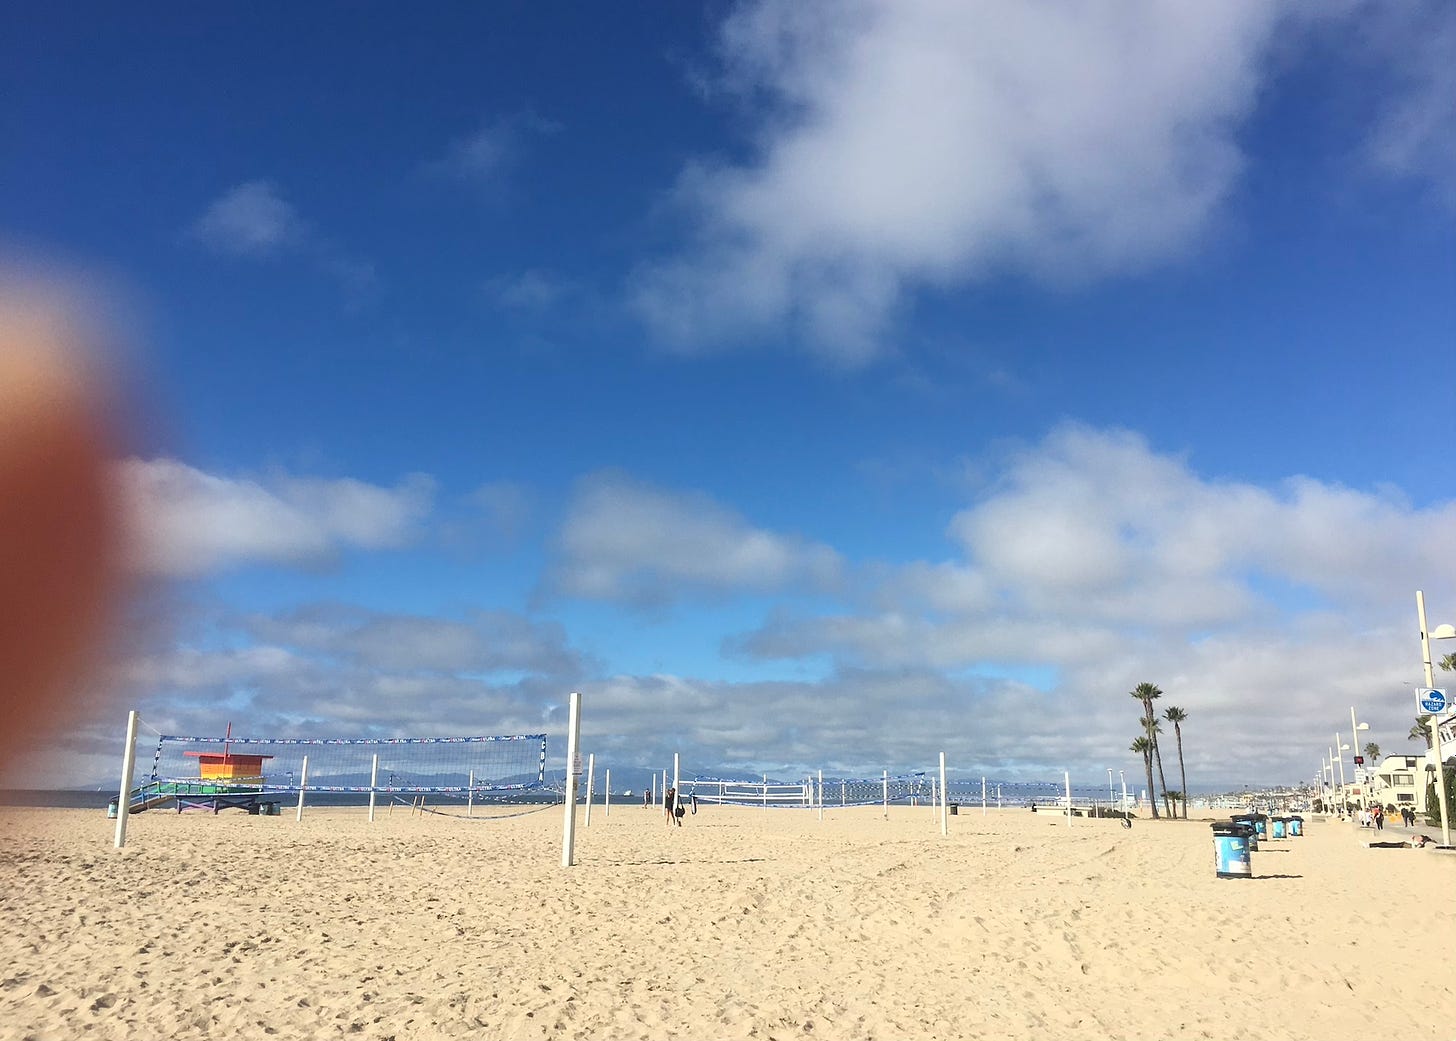 Very blue skies with a few clouds above a beach dotted with volleyball nets and palm trees. There is a blurry finger in the corner